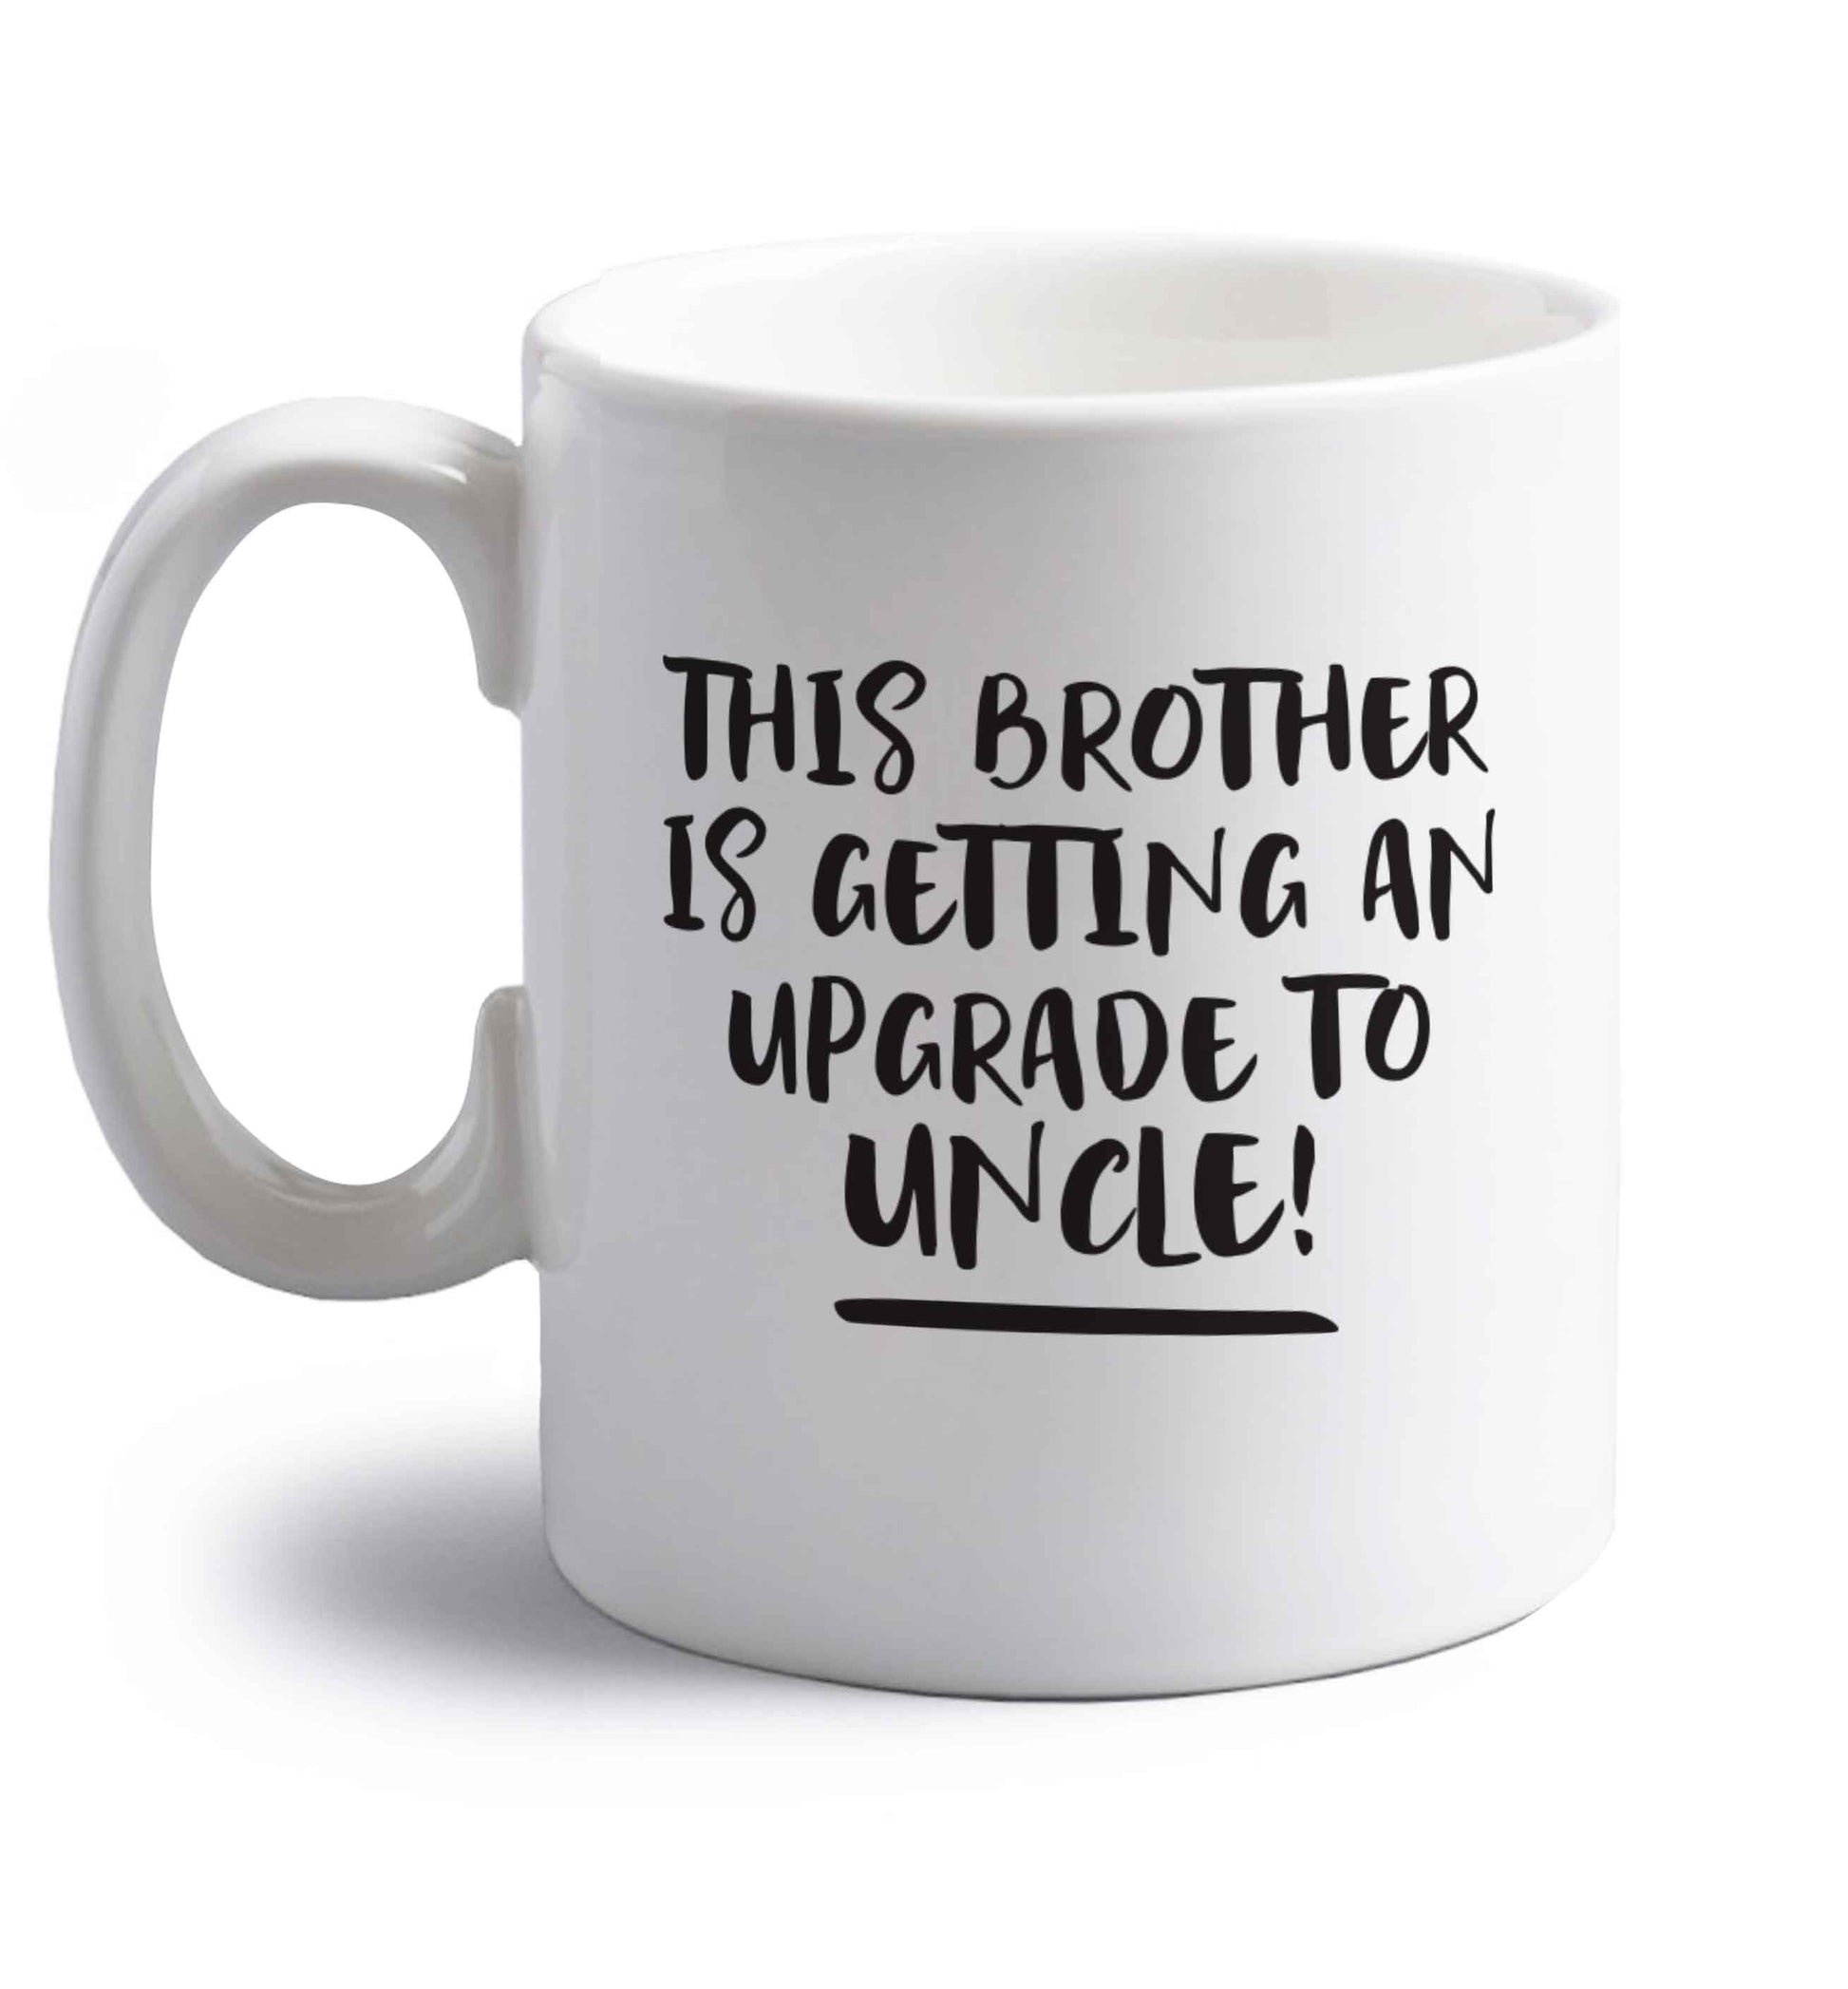 This brother is getting an upgrade to uncle! right handed white ceramic mug 